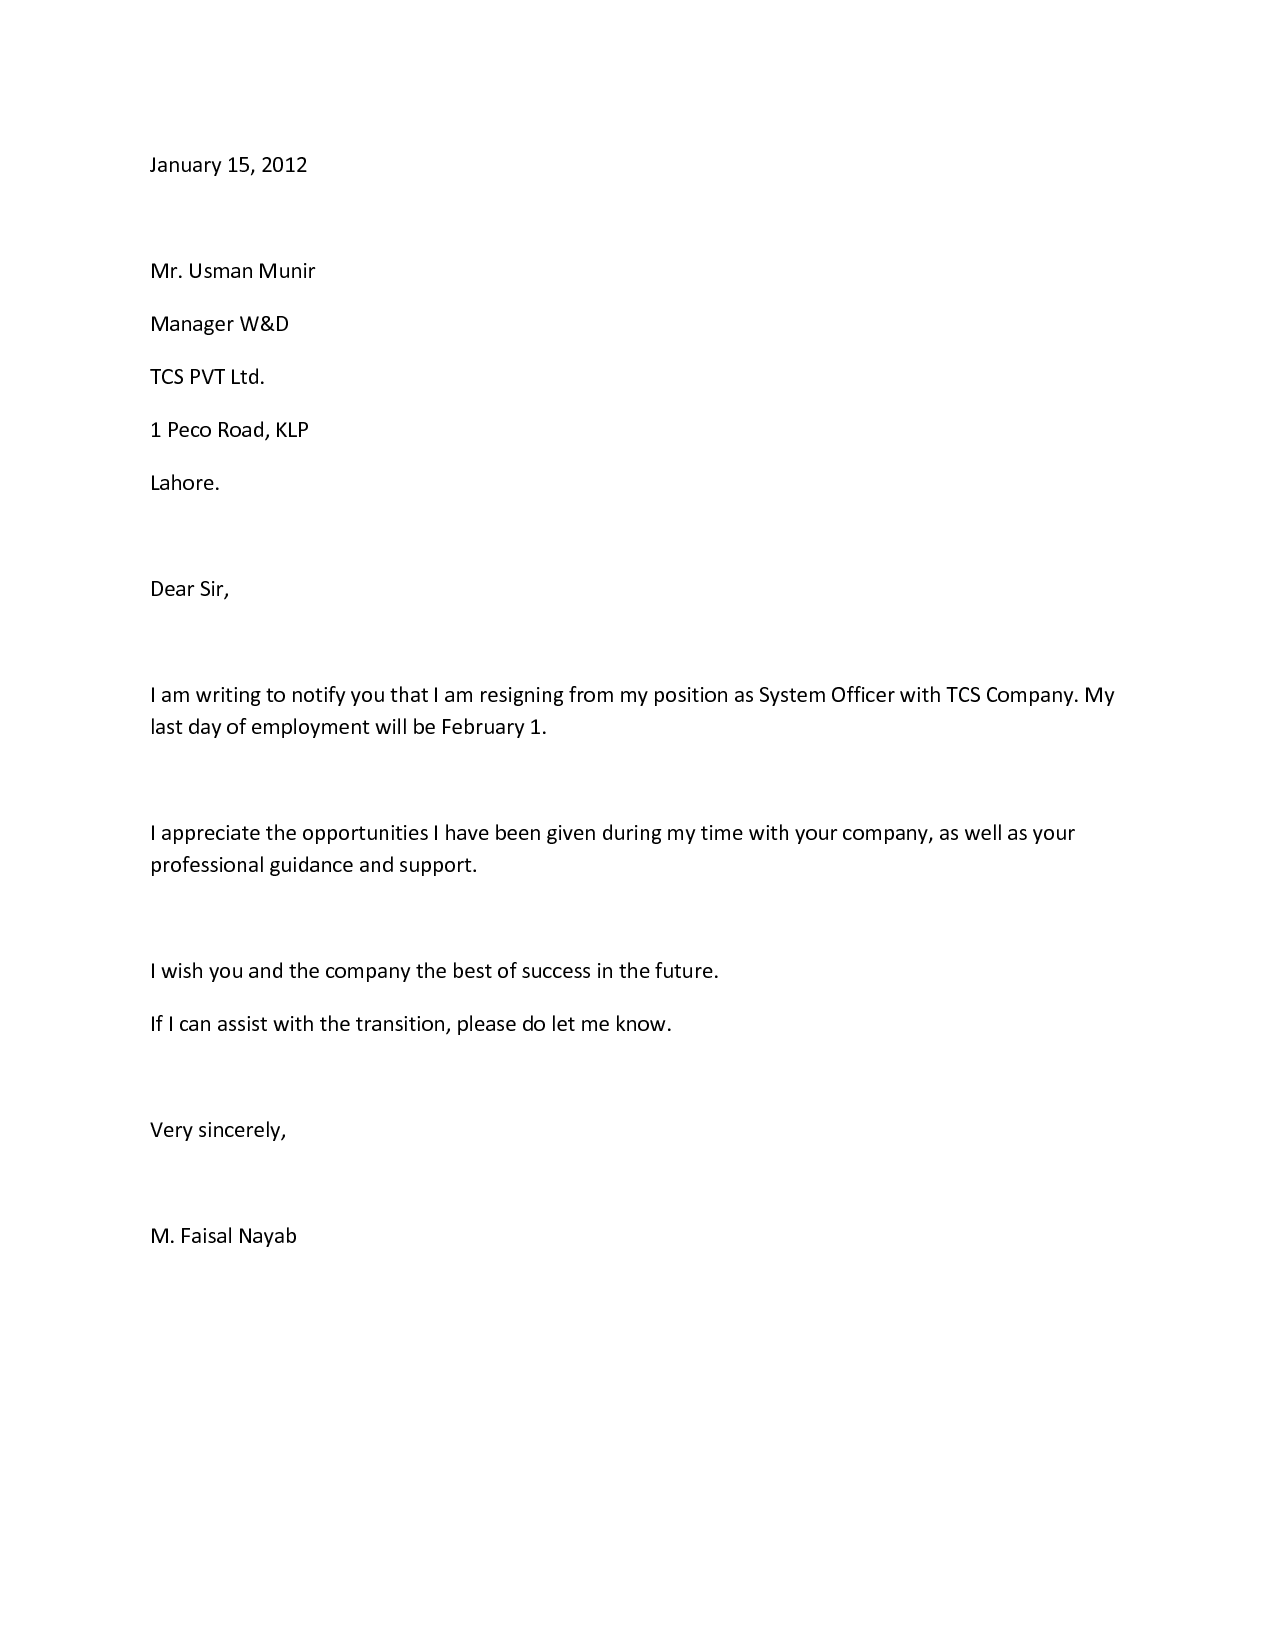 how to write a resignation letter rich image